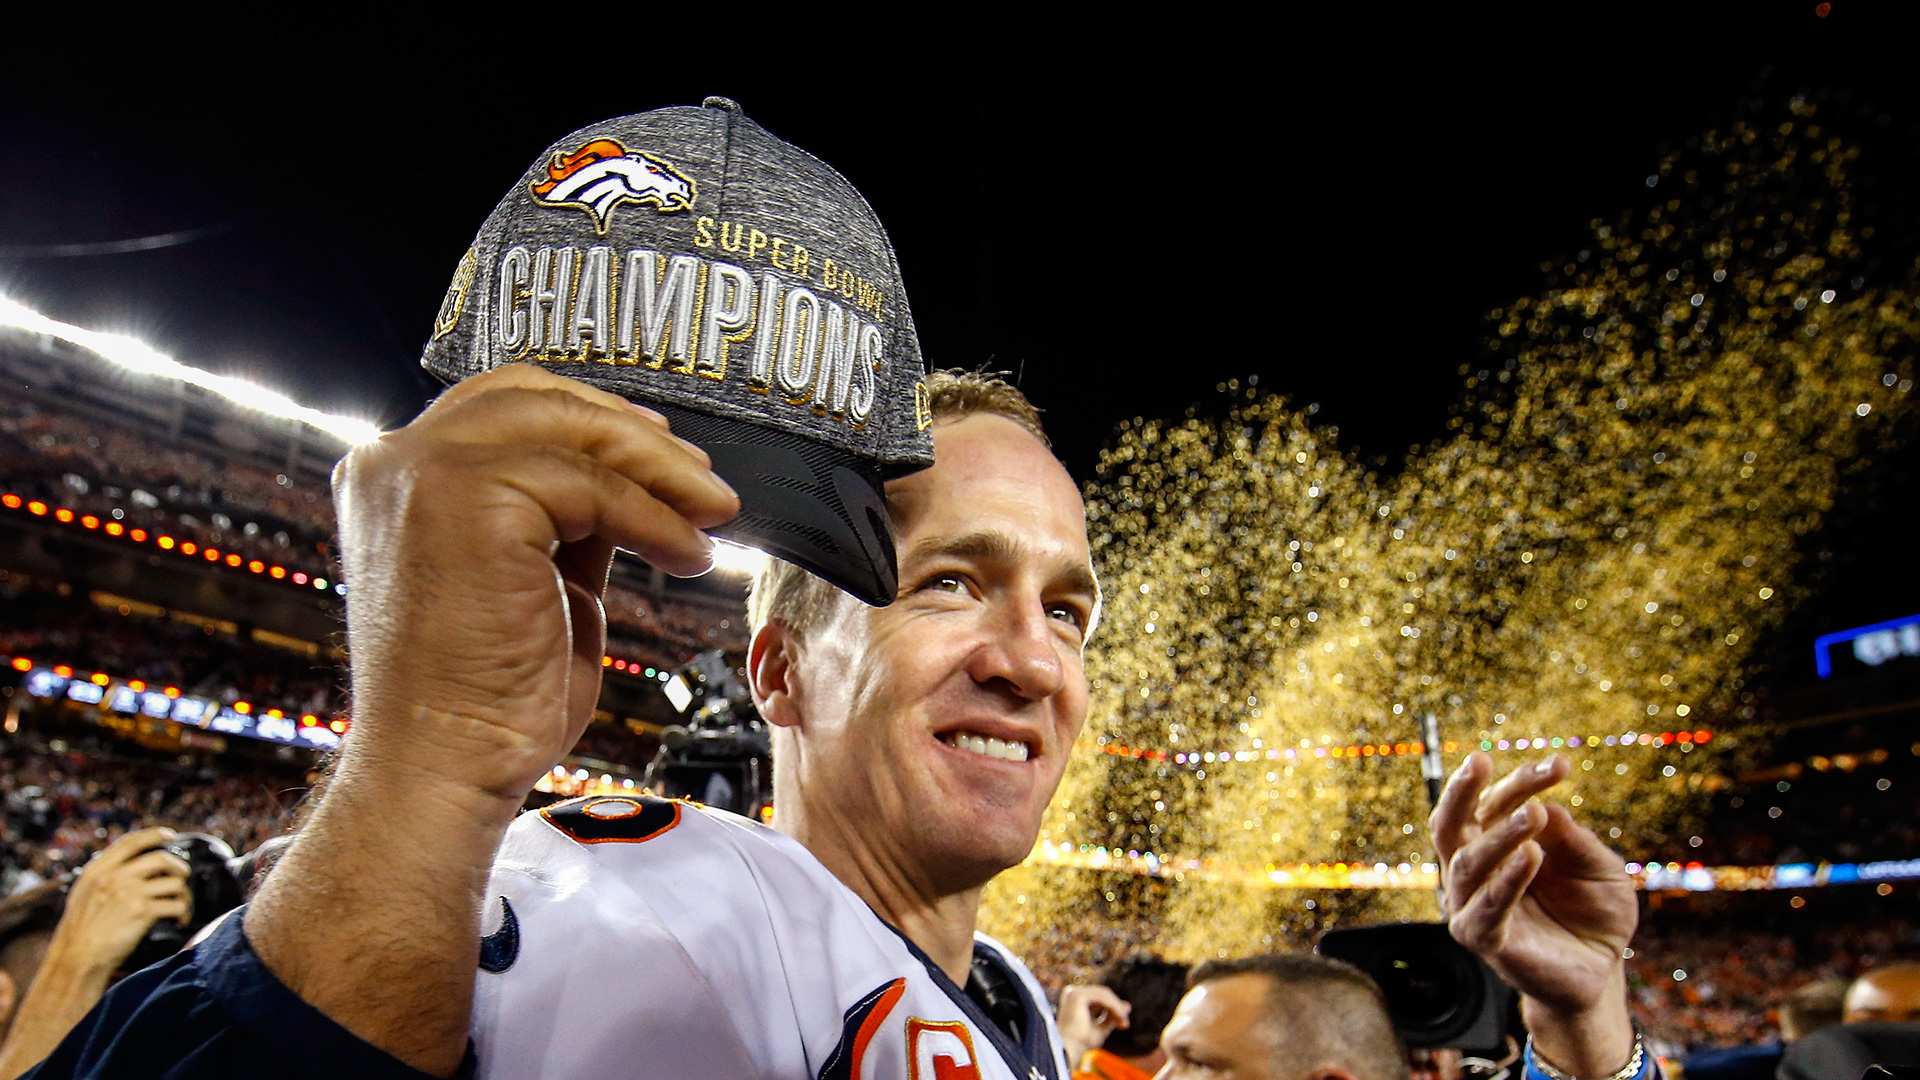 Peyton Manning Backgrounds, Compatible - PC, Mobile, Gadgets| 1920x1080 px